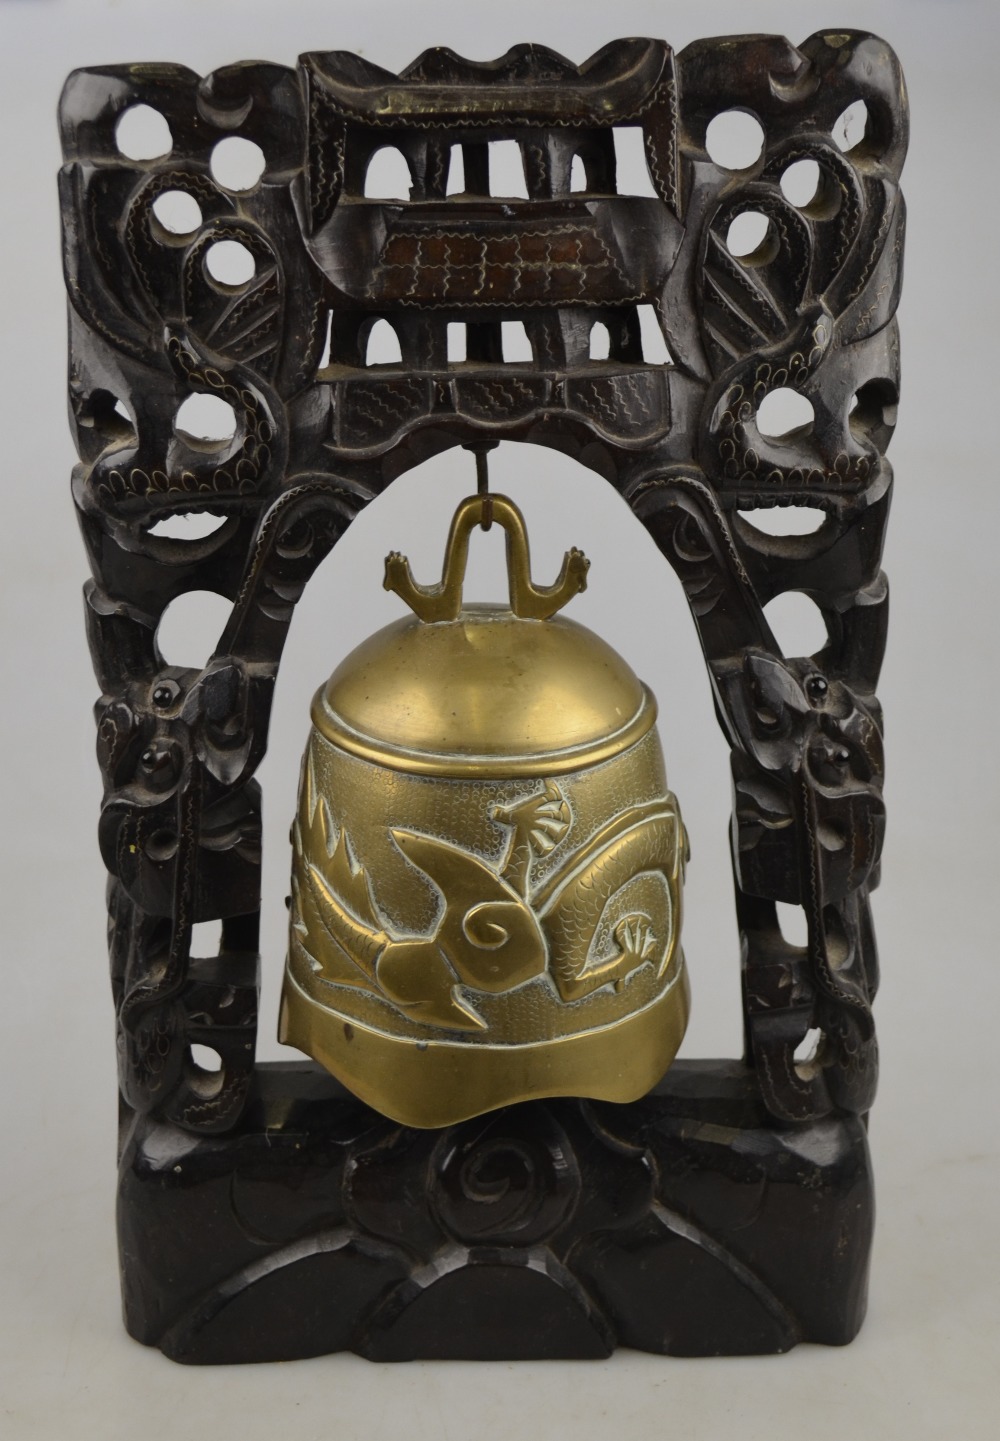 A Chinese brass Chung with carved hardwood support inlaid with silver wire, 19th century, 36.5 cm